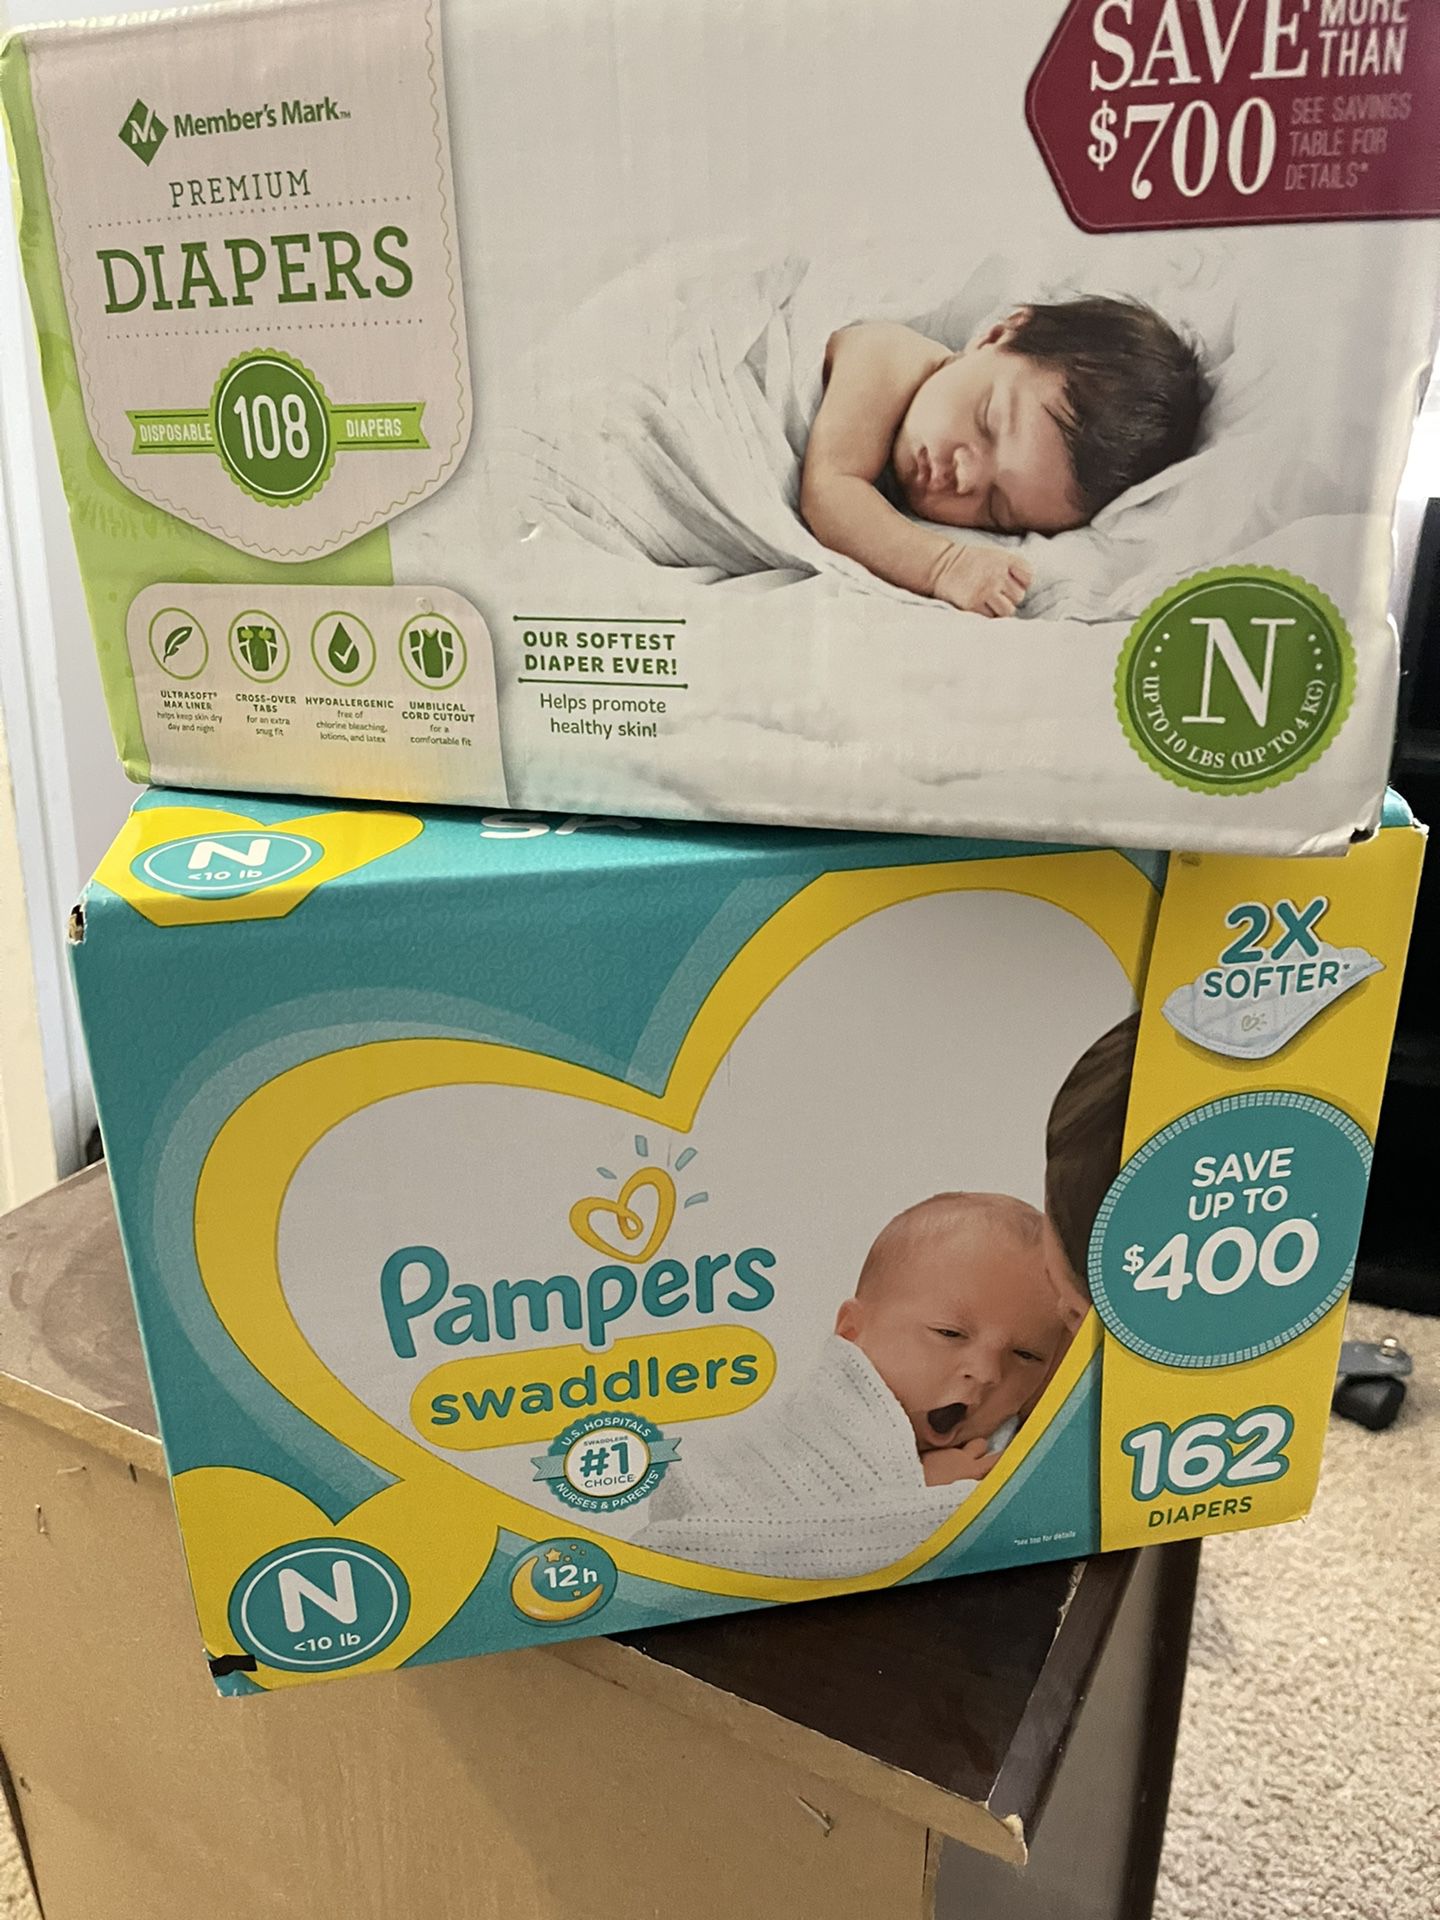 Unopened Boxes Of Diapers